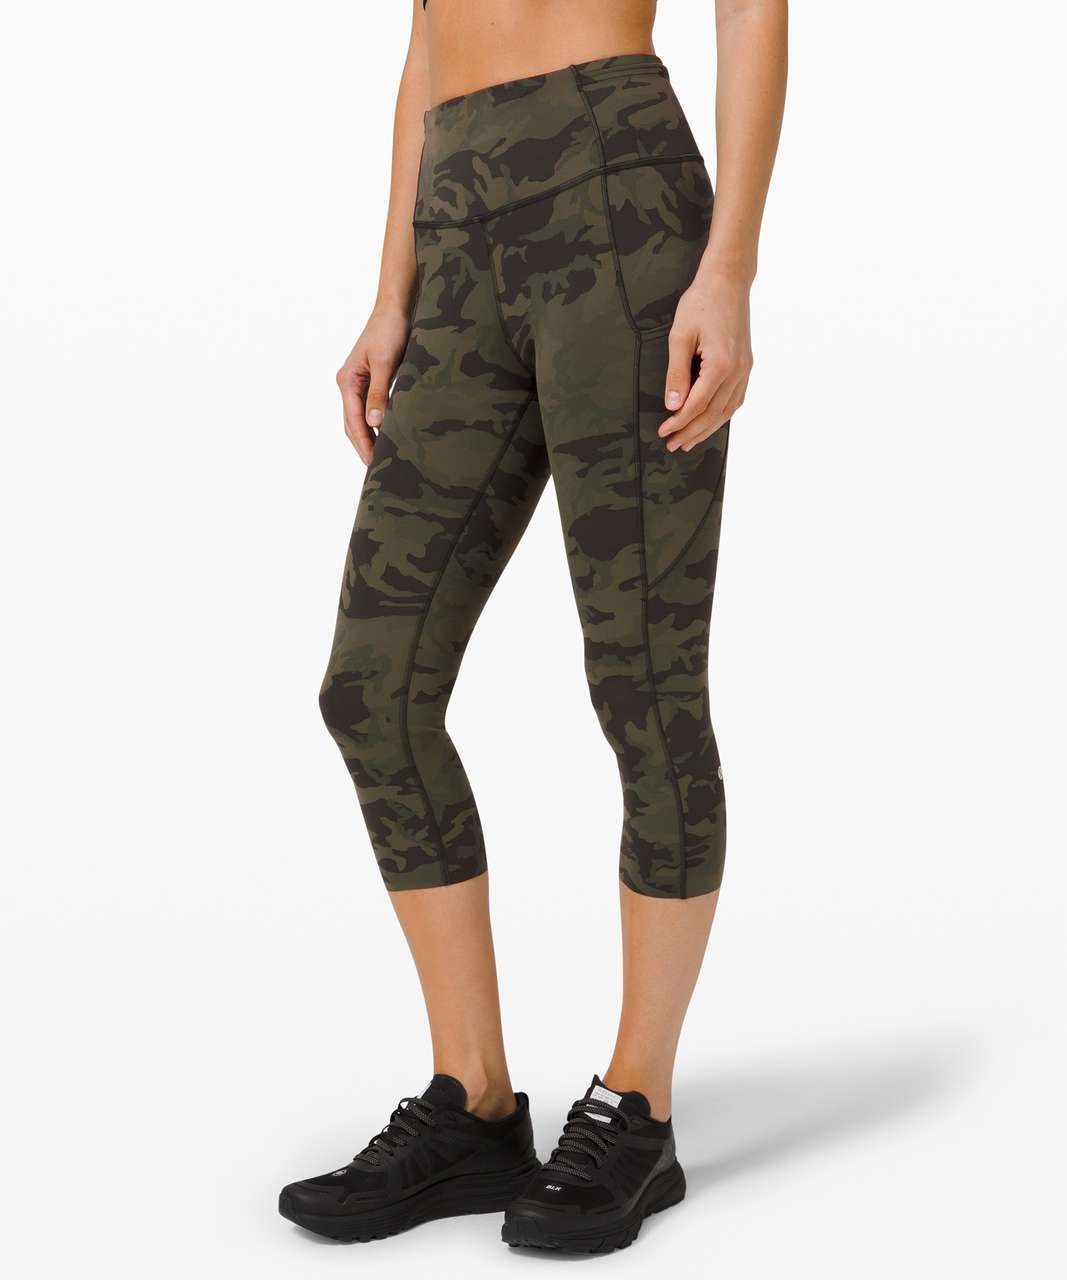 us][sell] EUC align 25in size 4 incognito camo gator green, $45 shipped :  r/lululemonBST